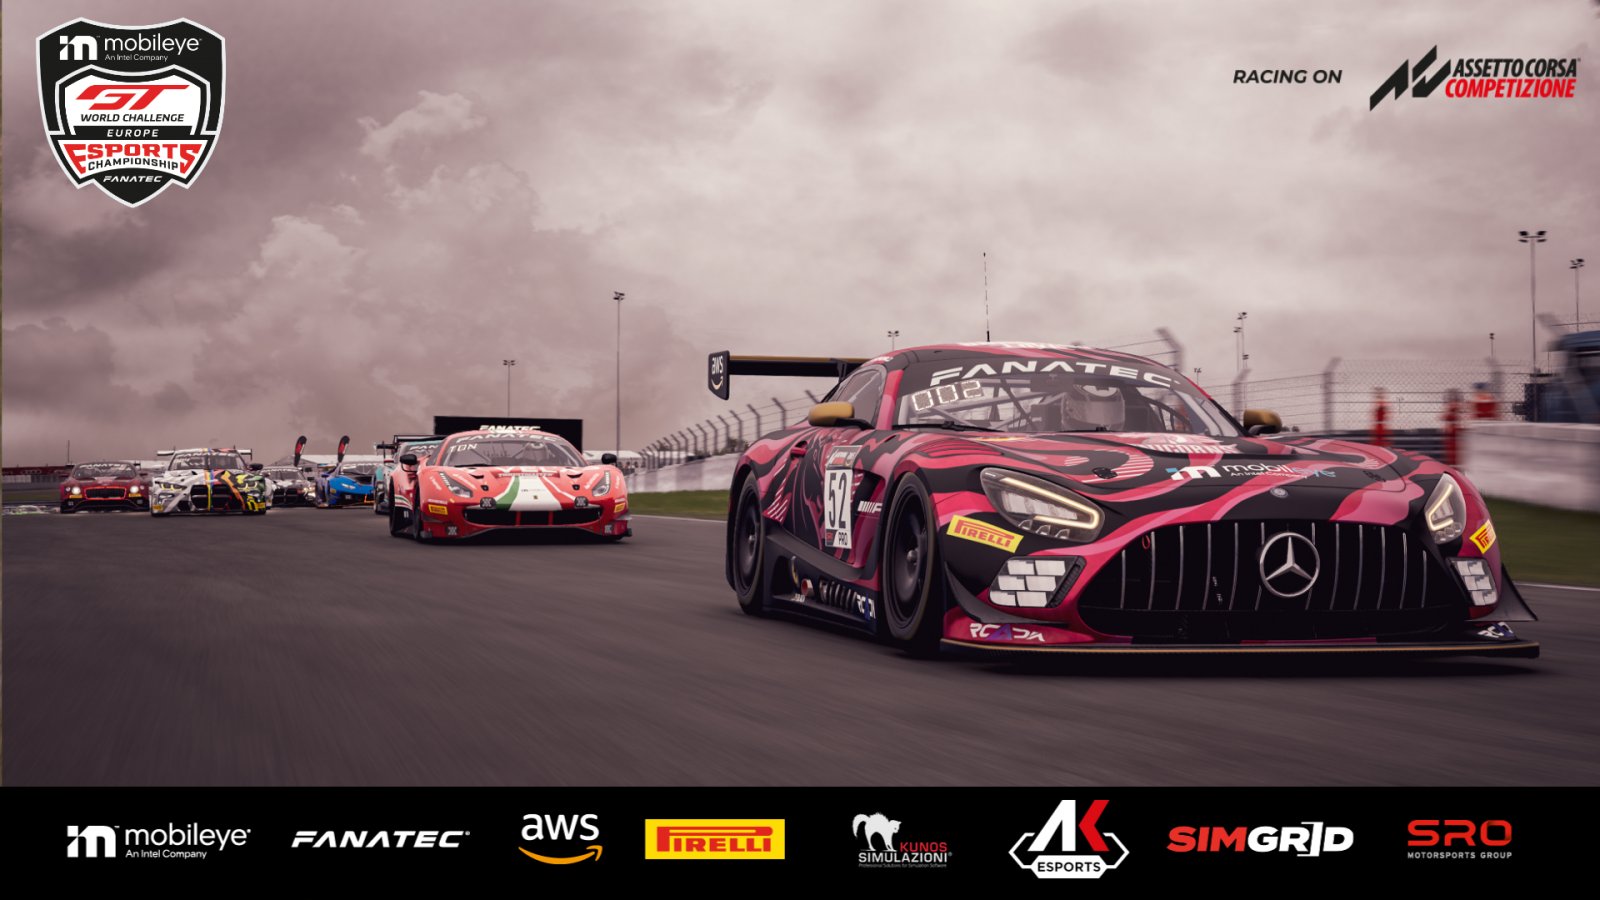 ESPORTS: Mobileye GT World Challenge Europe Esports season approaches finishing straight with penultimate round at Hungaroring